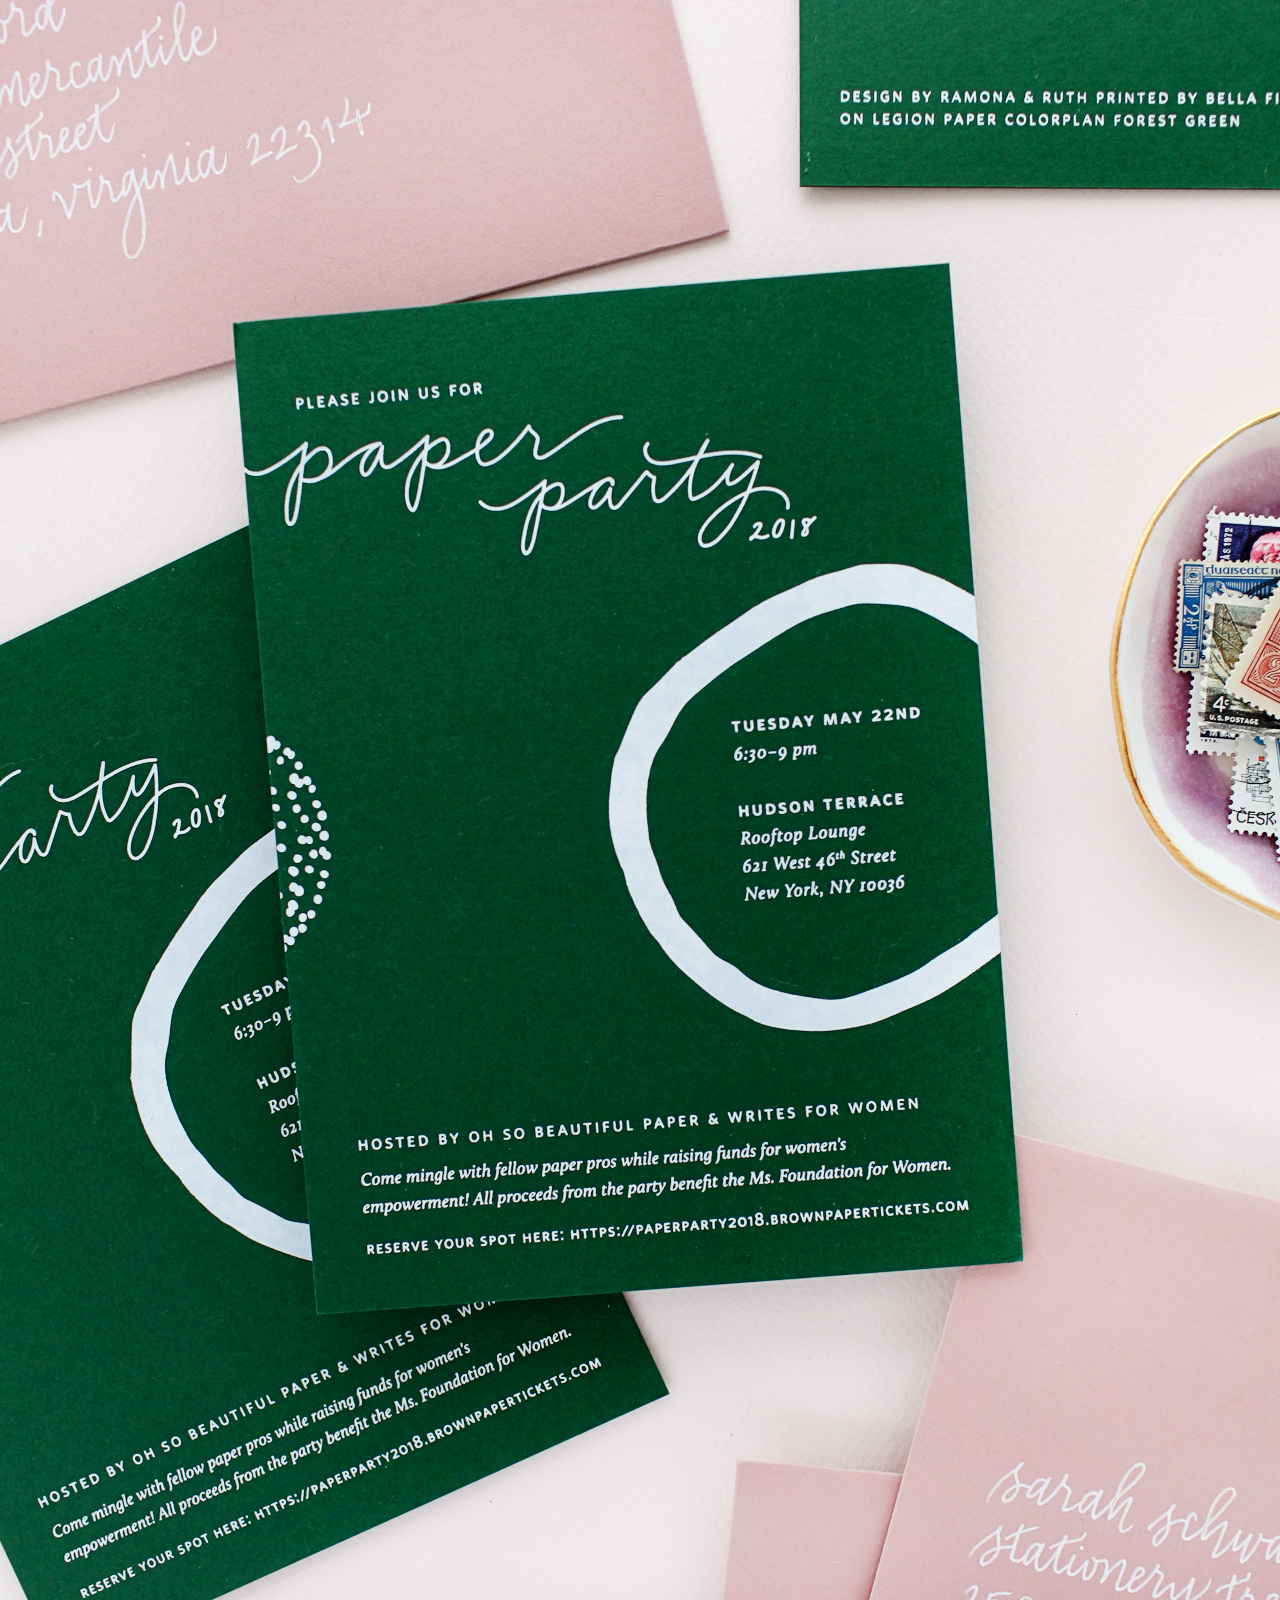 Paper Party 2018 Modern Minimalist Invitations with Abstract Shapes / Design by Ramona & Ruth / Printed by Bella Figura on Legion Paper Colorplan Forest Green